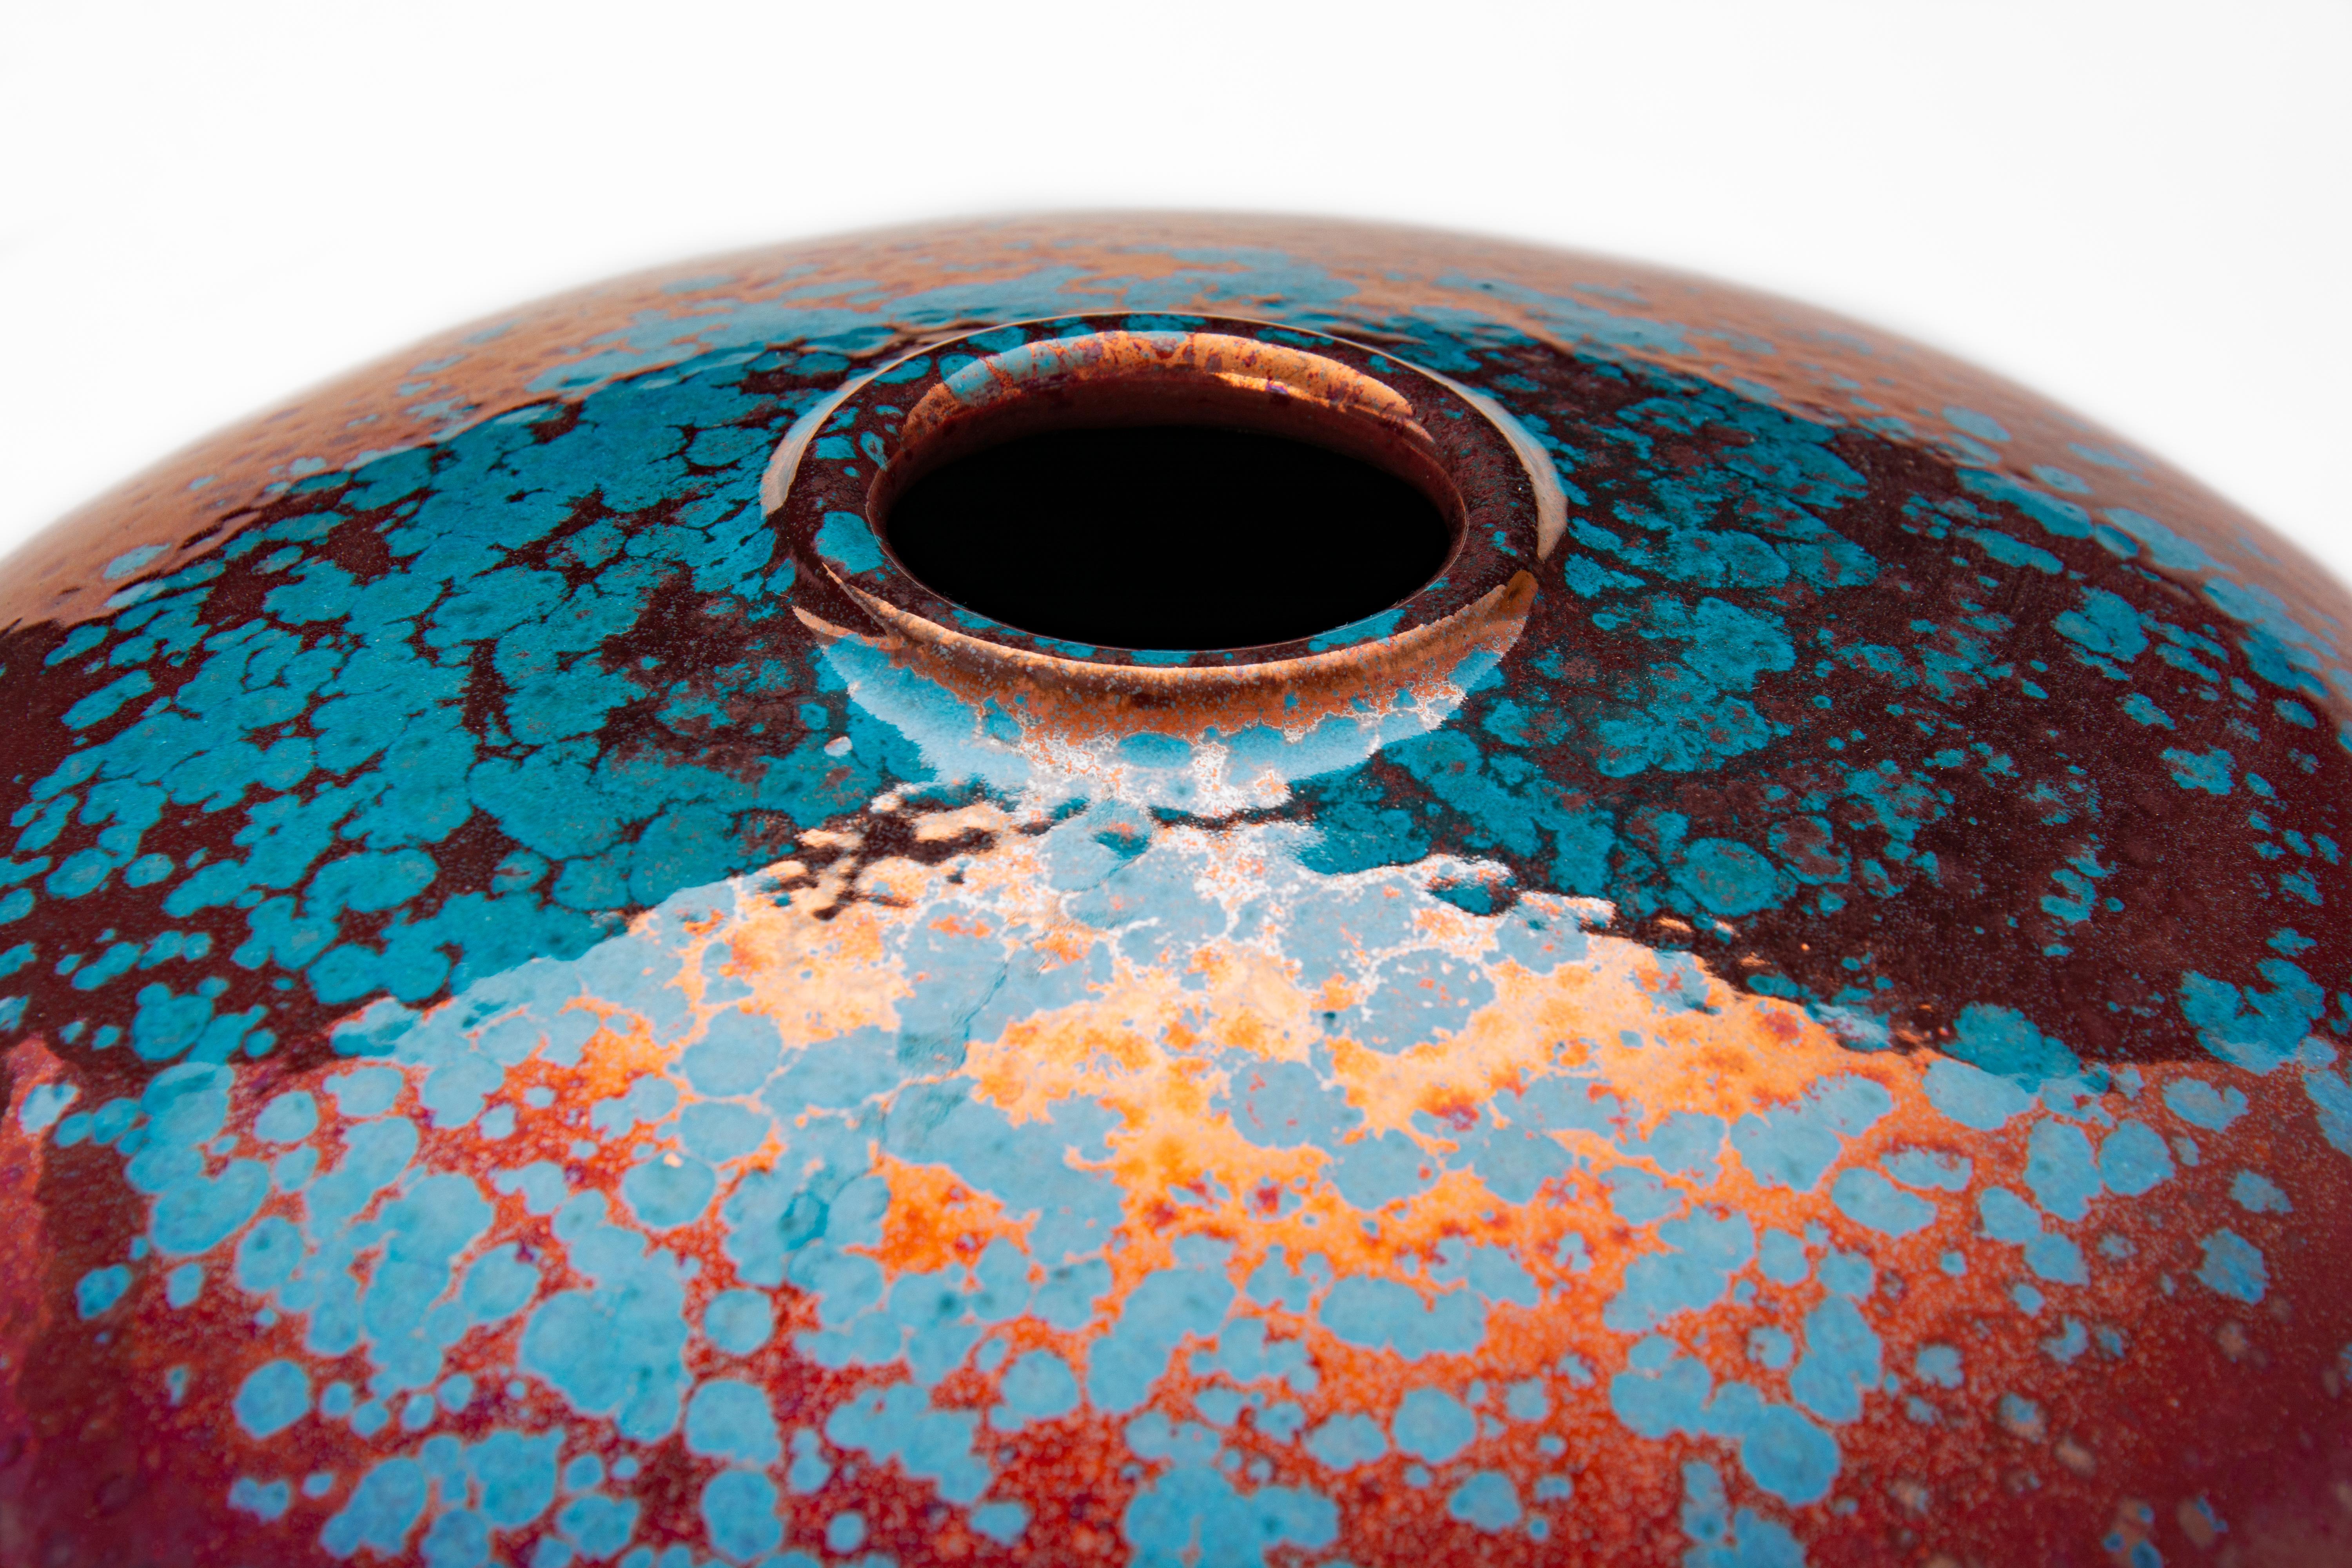 Moon jar, full-fire reduction faience earthenware 30cm diameter,unique piece, 2020

Bottega Vignoli is a brand of artistic ceramics based in Faenza, one of the most representative ceramic production centres in Italy. Founded in 1976 by sisters